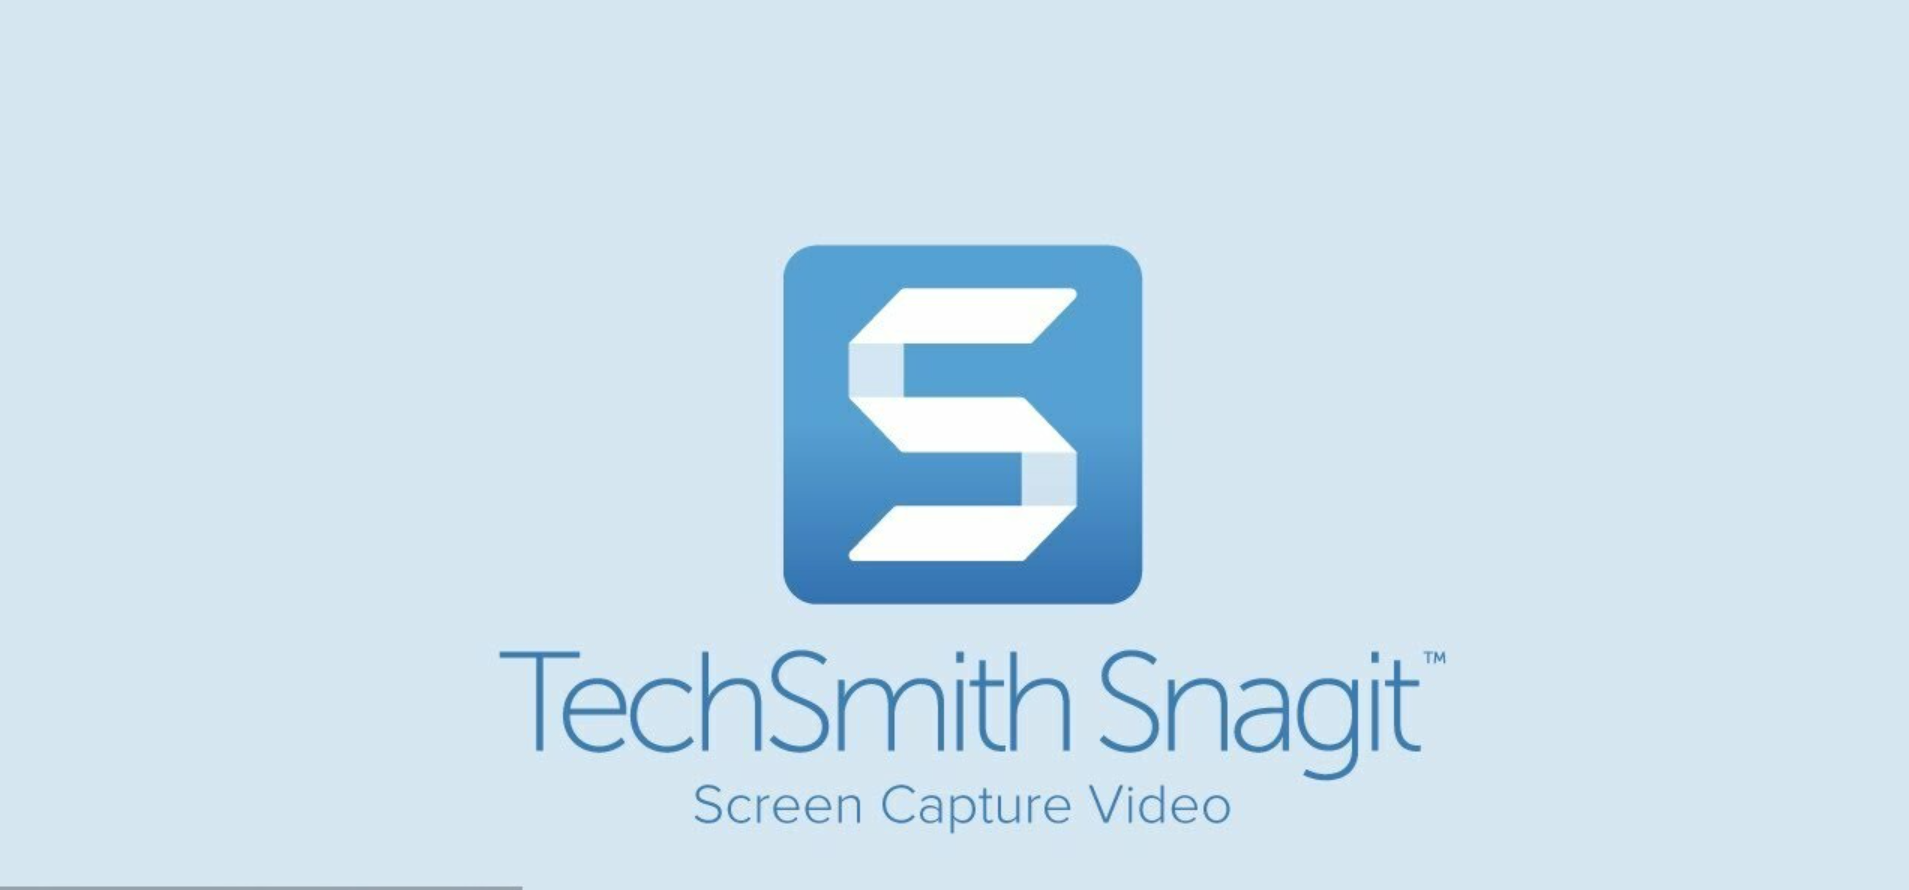 Version 1: "TechSmith Snagit screen capture video software with TechSmith Snagit crack for enhanced functionality."